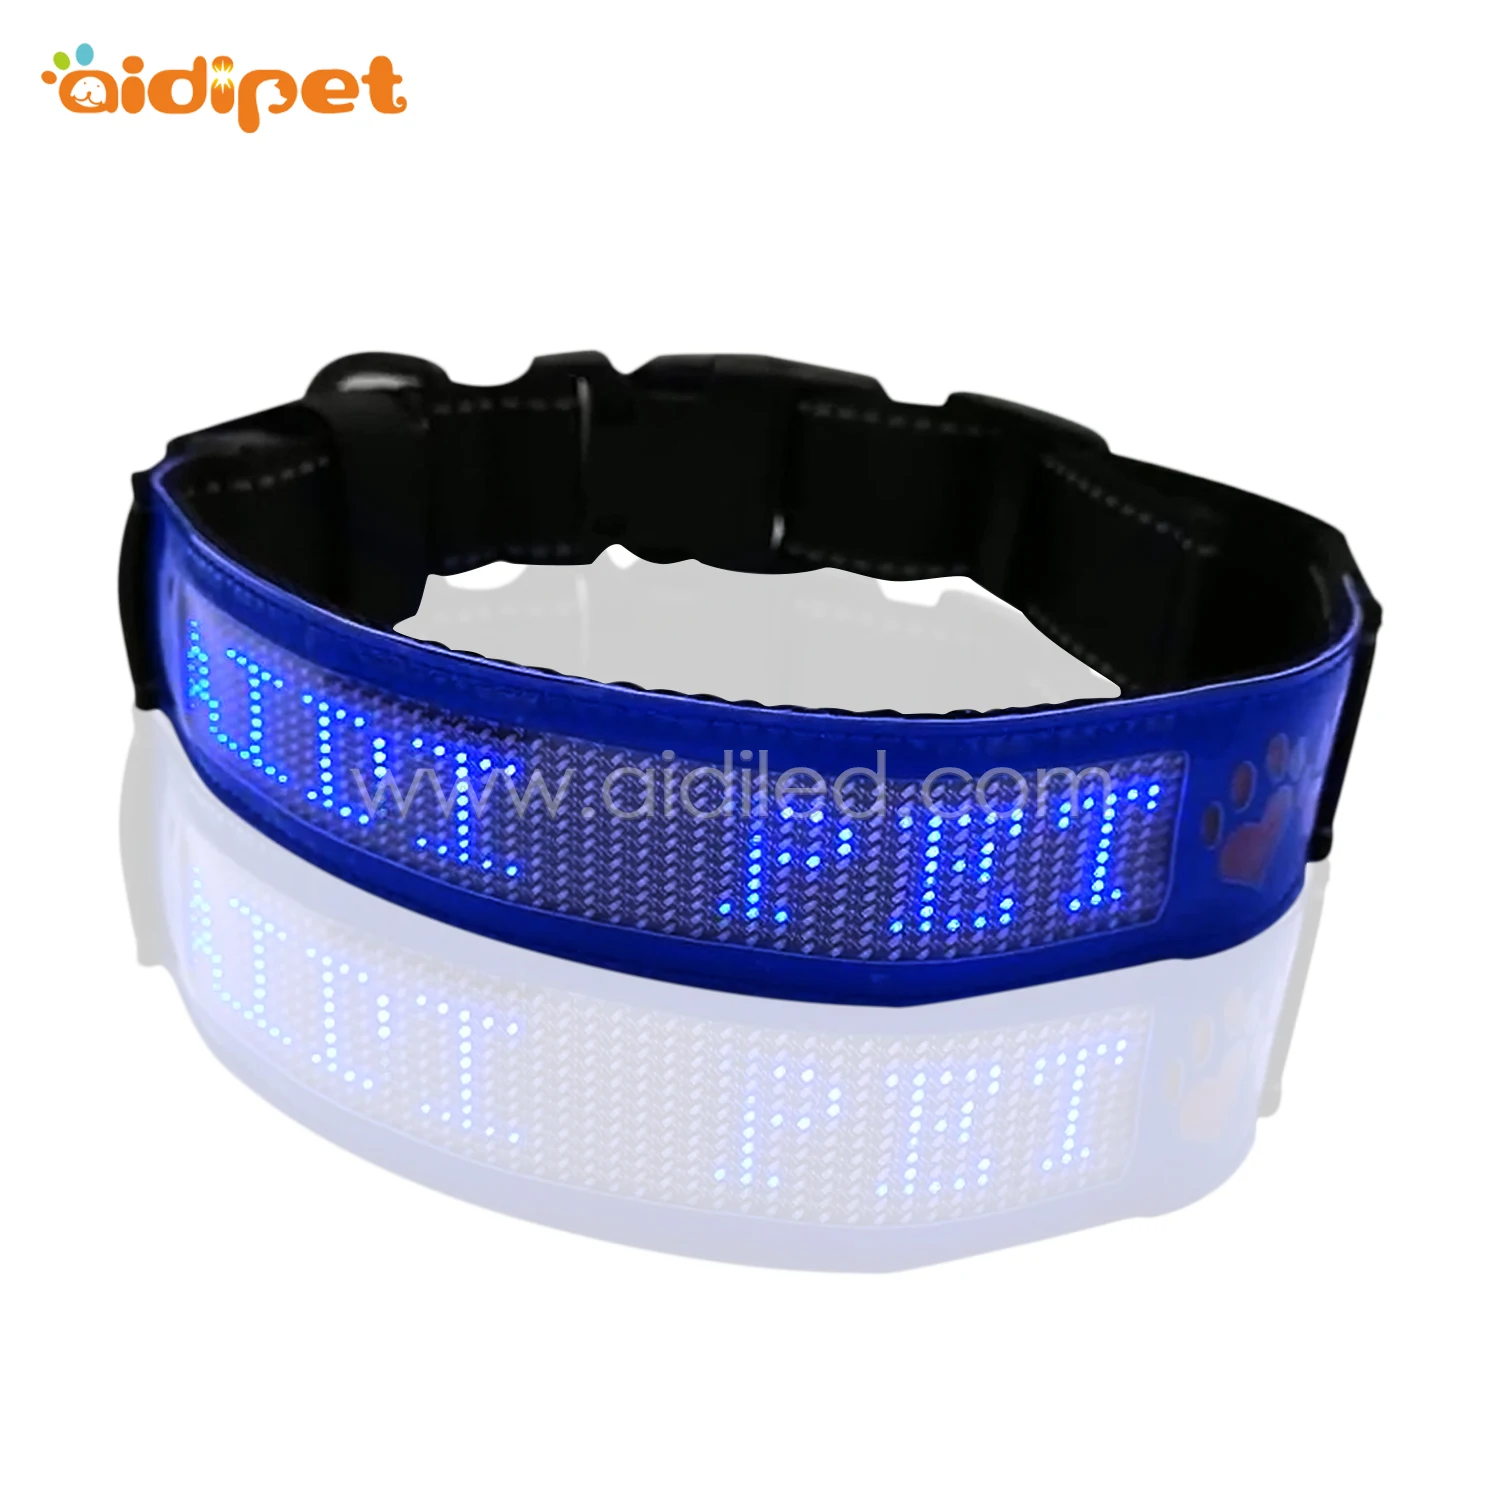 APP Controlled Led Smart Dog Collar Bluetooth Connection Led Screen Showing Words Collars for Dogs